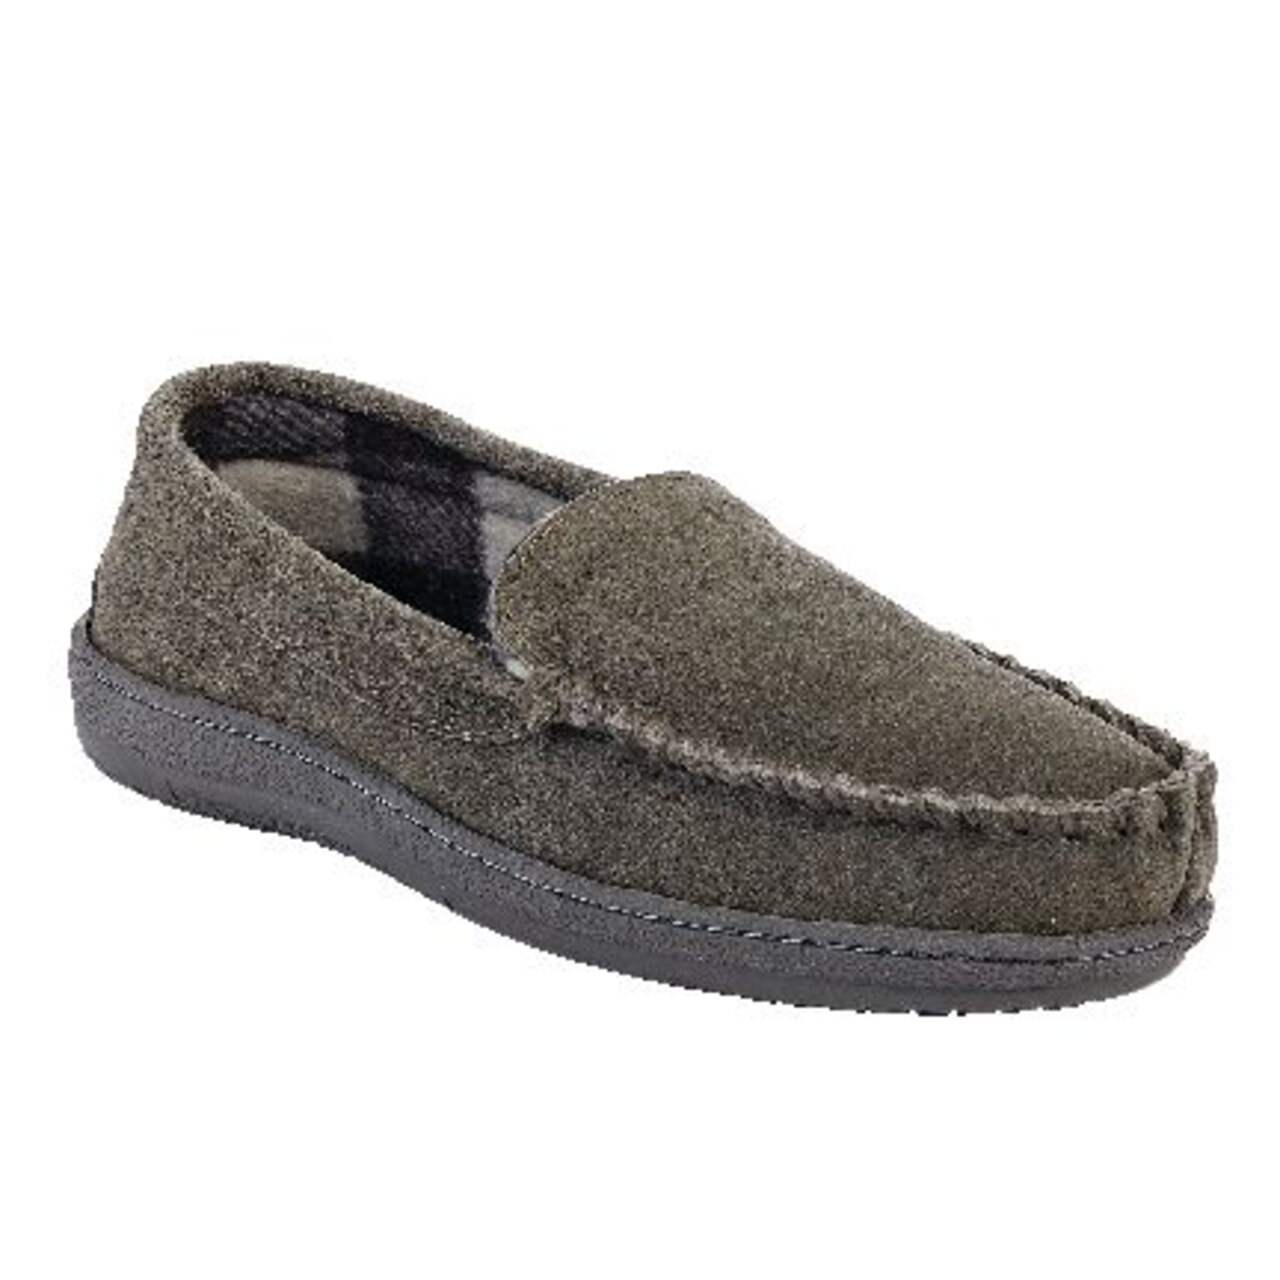 Outbound Men's Fleece Lined Leather Indoor House Slippers Non-Slip